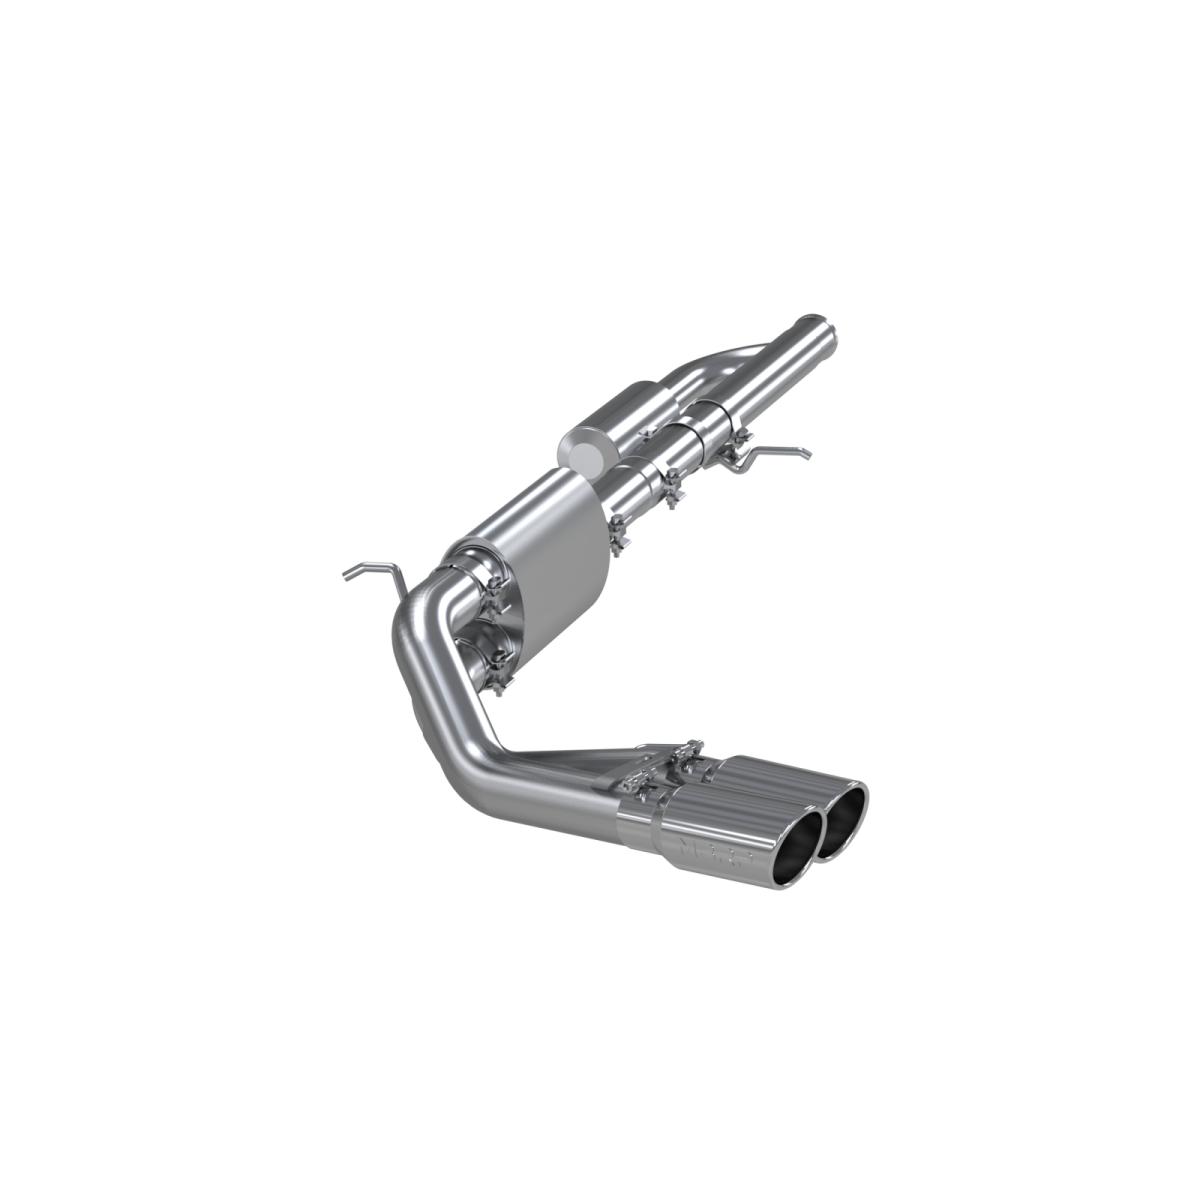 MBRP - MBRP 3 Inch Cat Back Exhaust System Pre-Axle Dual Outlet T304 Stainless Steel For 09-18 Silverado/Sierra 1500 4.3L V6, 5.3L V8 19-19 Silverado/Sierra 1500 4.3L V6, 5.3L V8 Limited LD S5081304